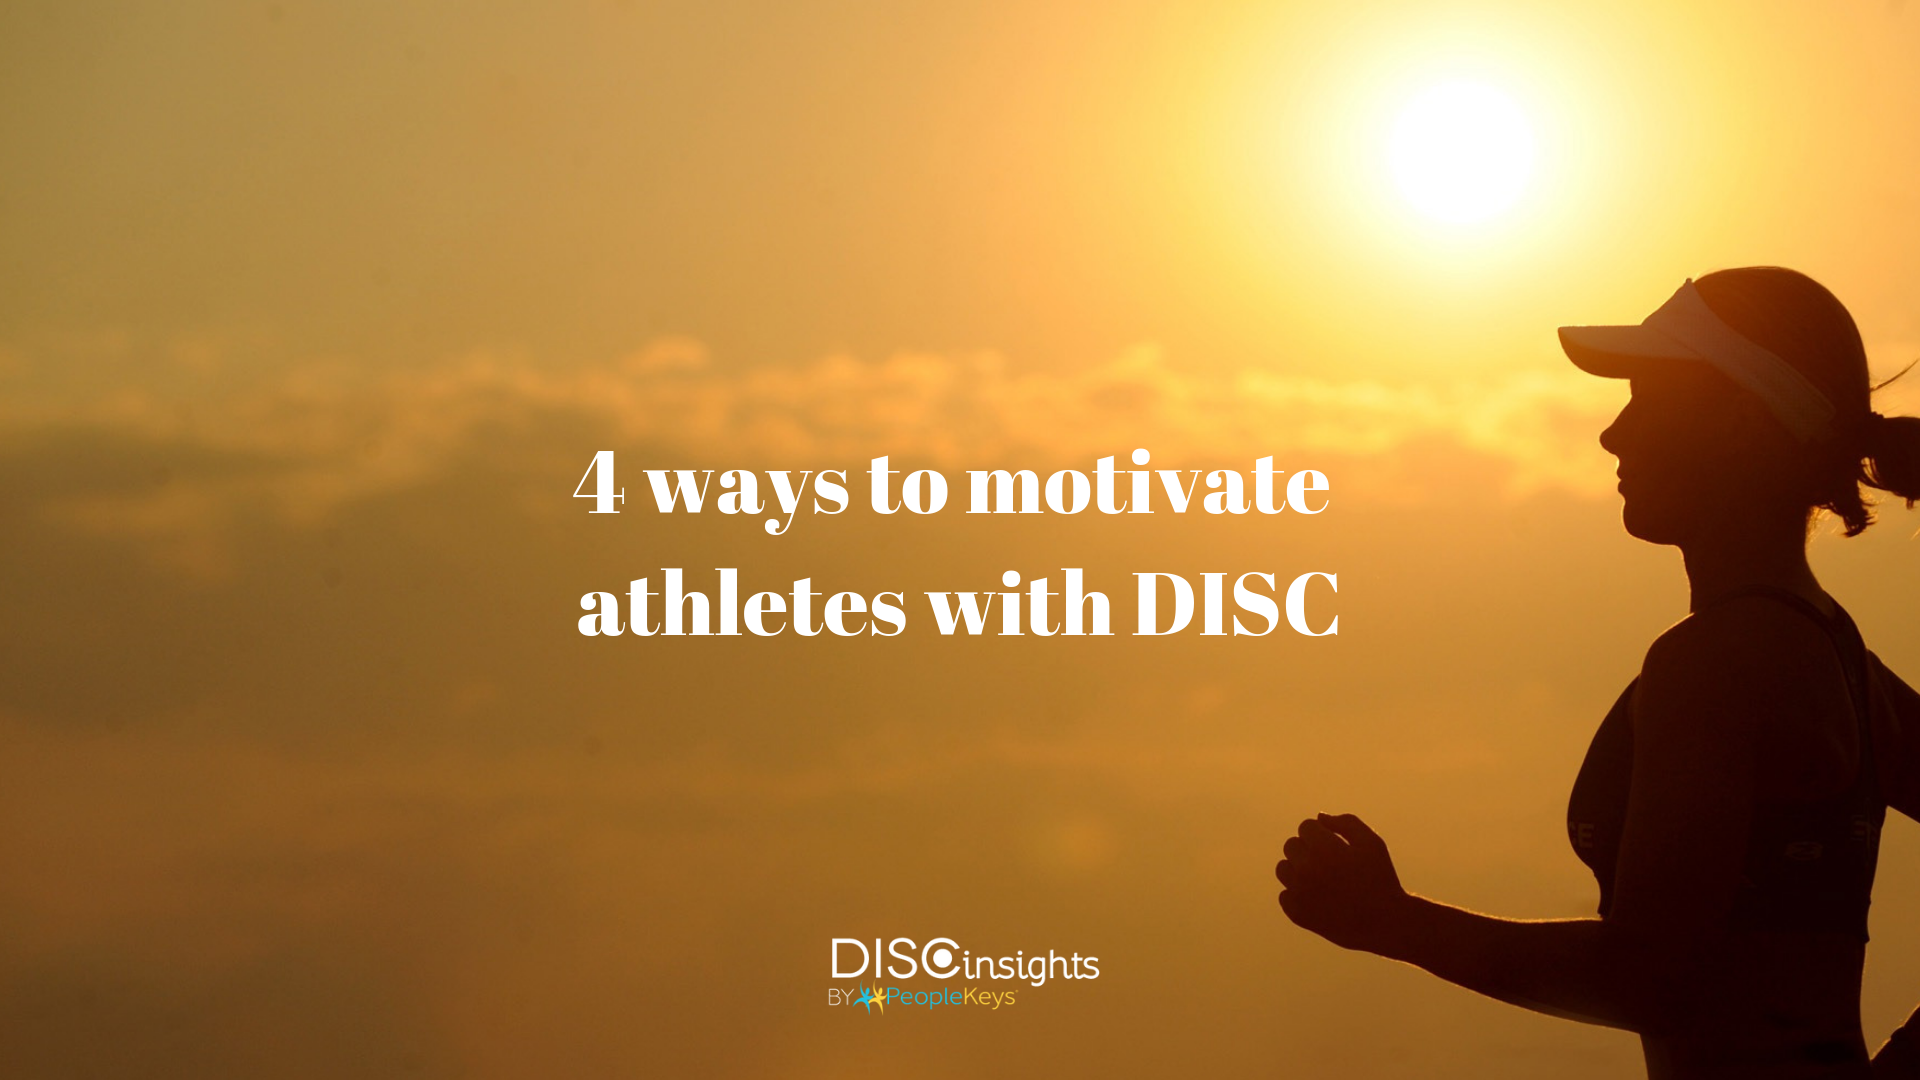 4 ways to motivate athletes with DISC